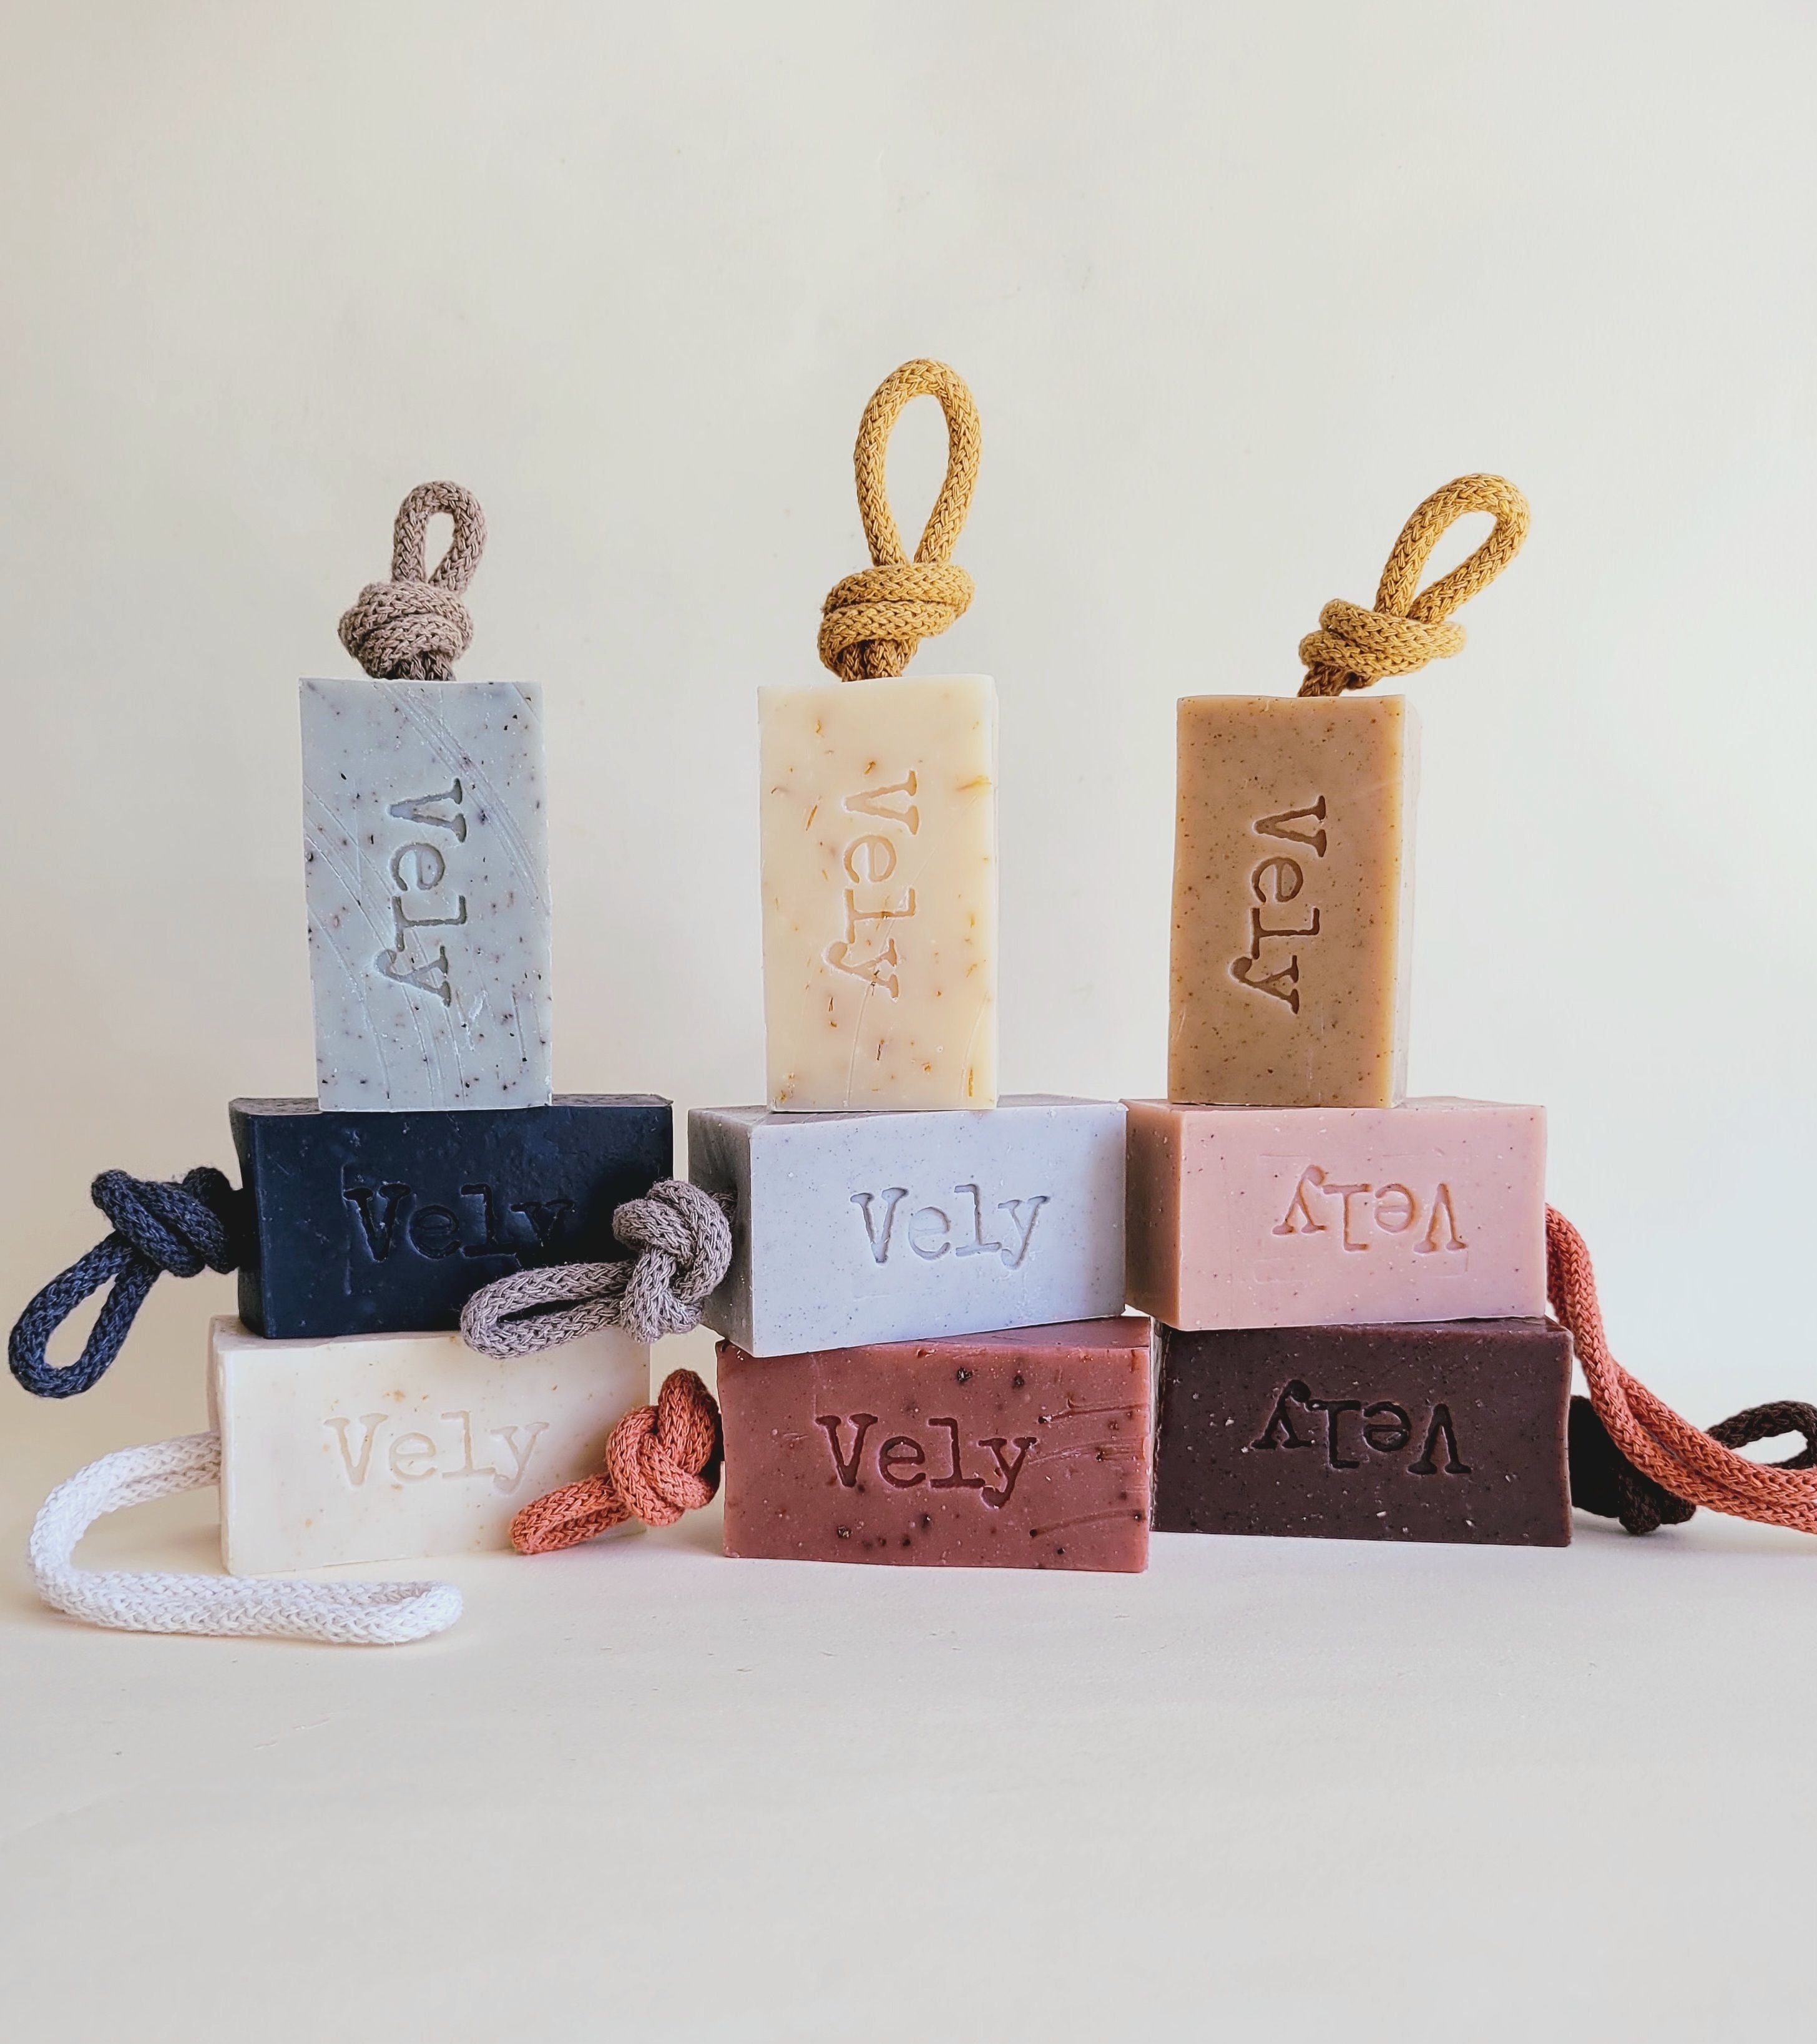 Natural Vegan Soap On A Rope With Coffee and Raw Cacao "COCO"